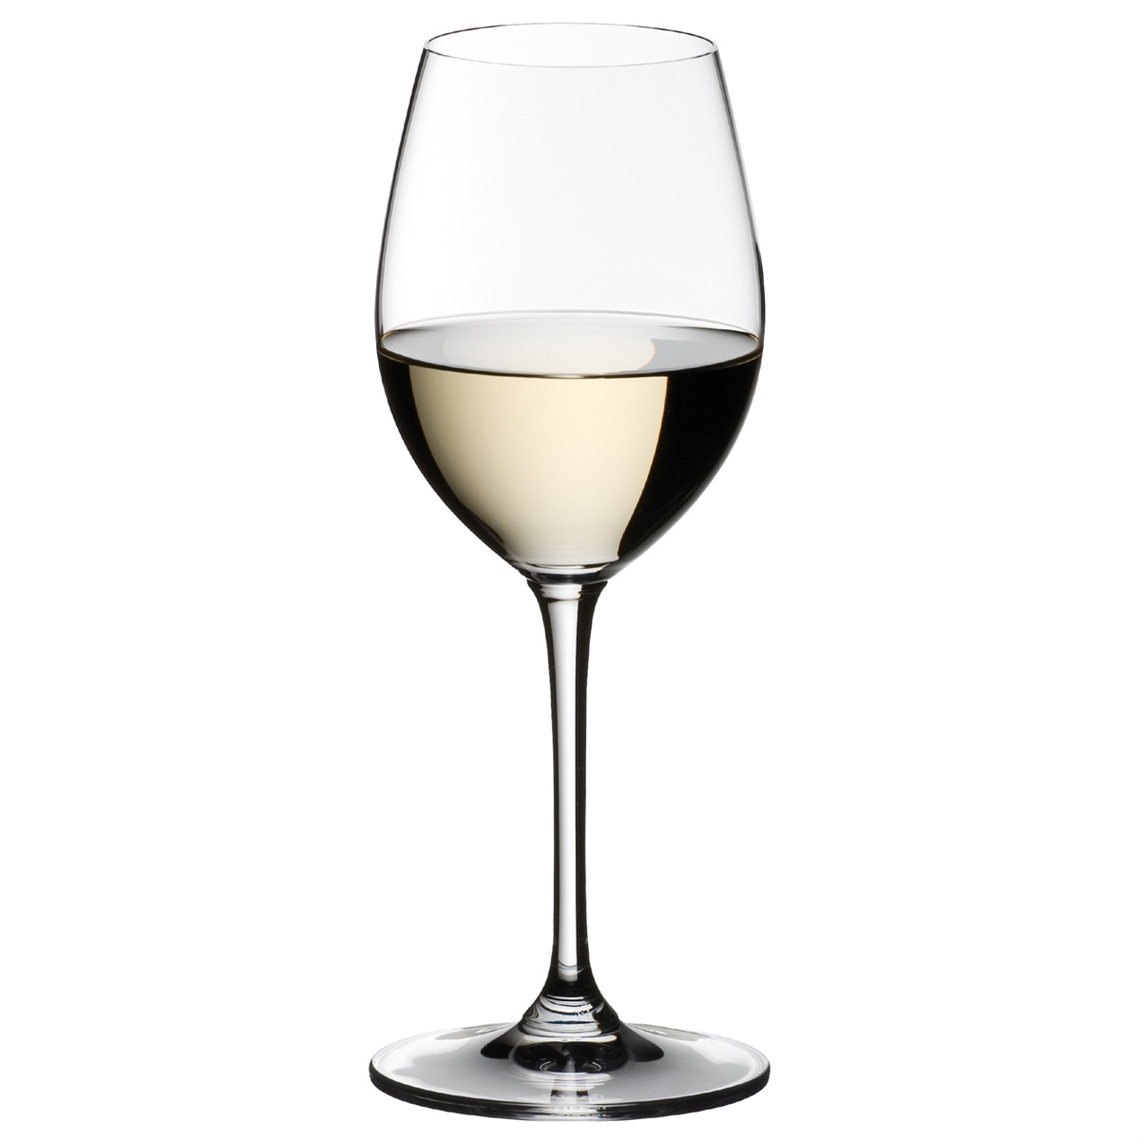 View more riedel veloce from our Dessert Wine Glasses range